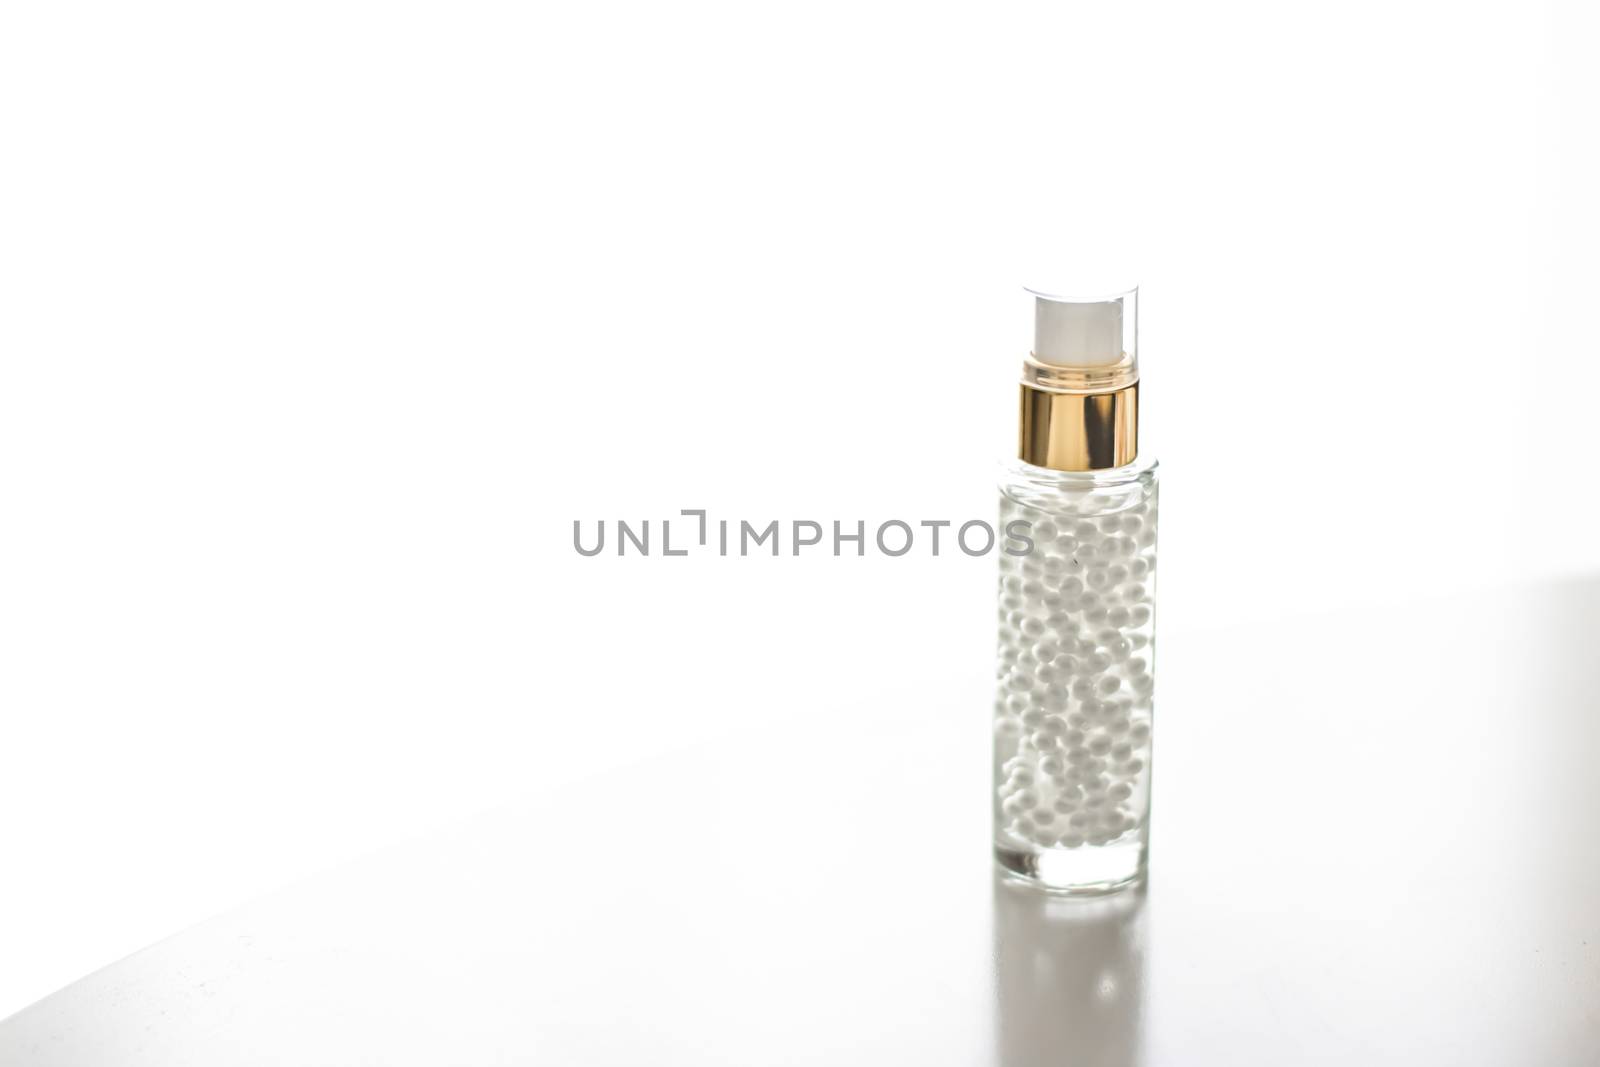 Serum gel or make-up primer in bottle, luxury skincare cosmetics by Anneleven